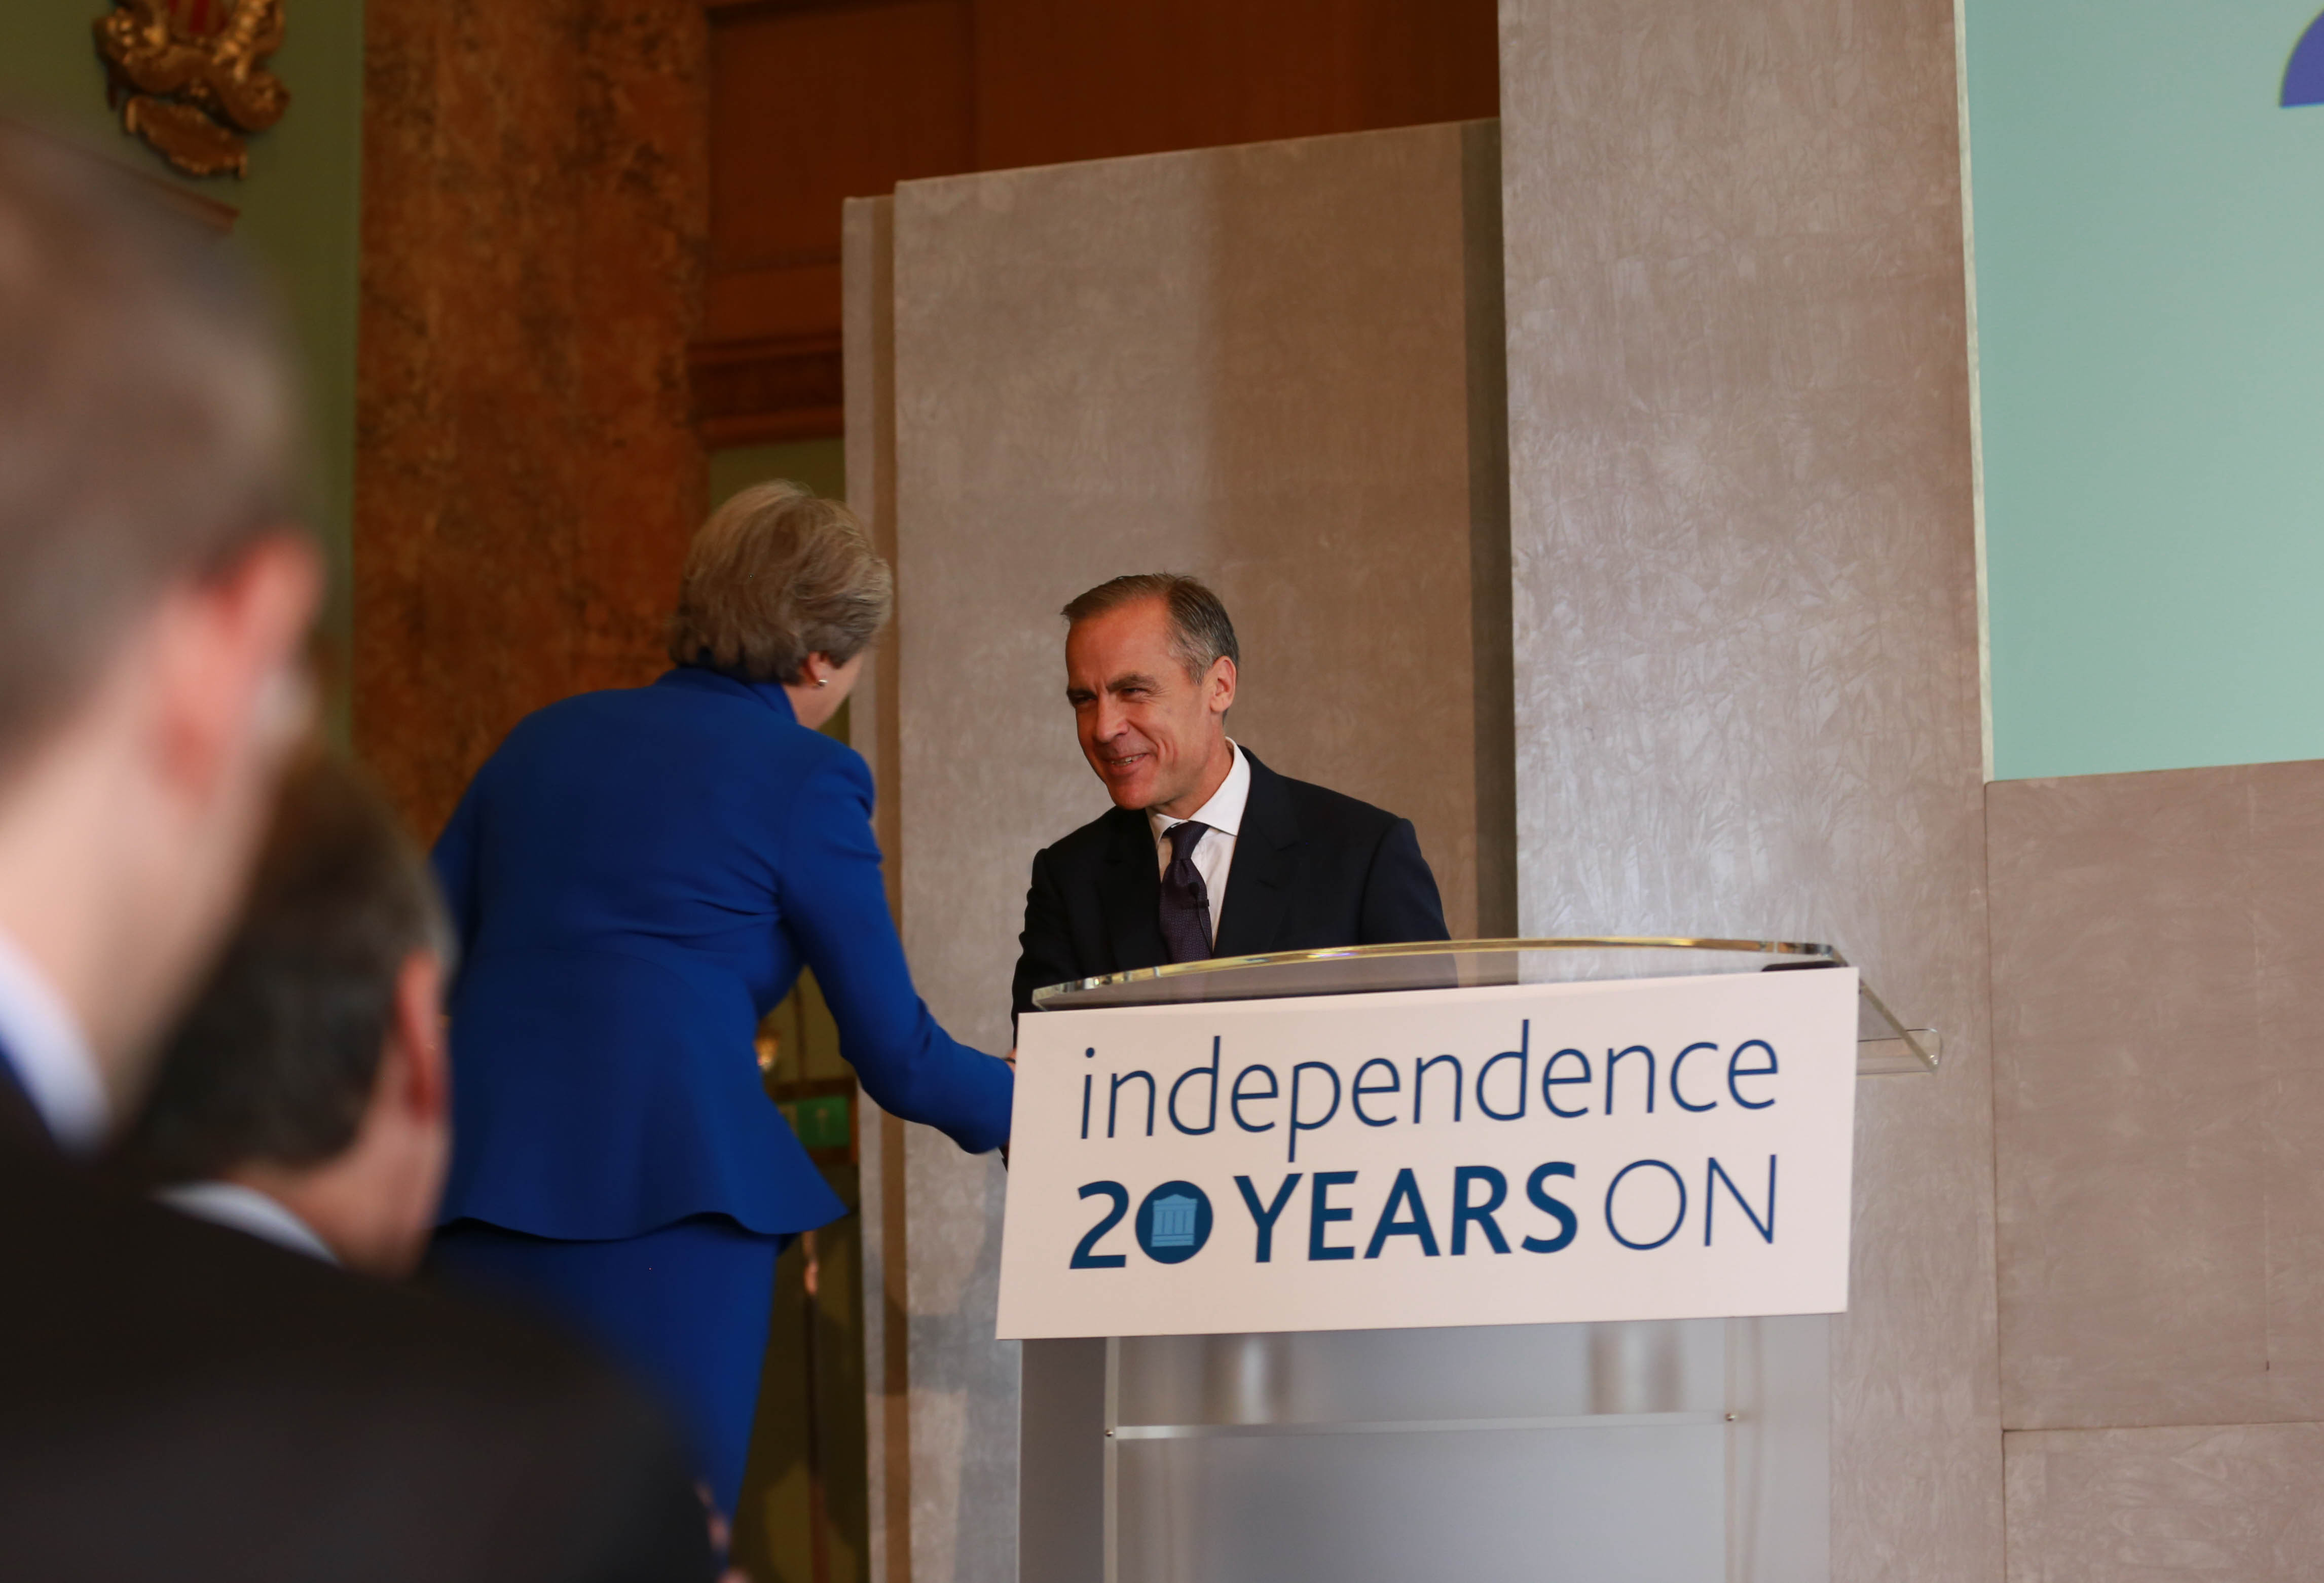 Mark Carney and the Theresa May